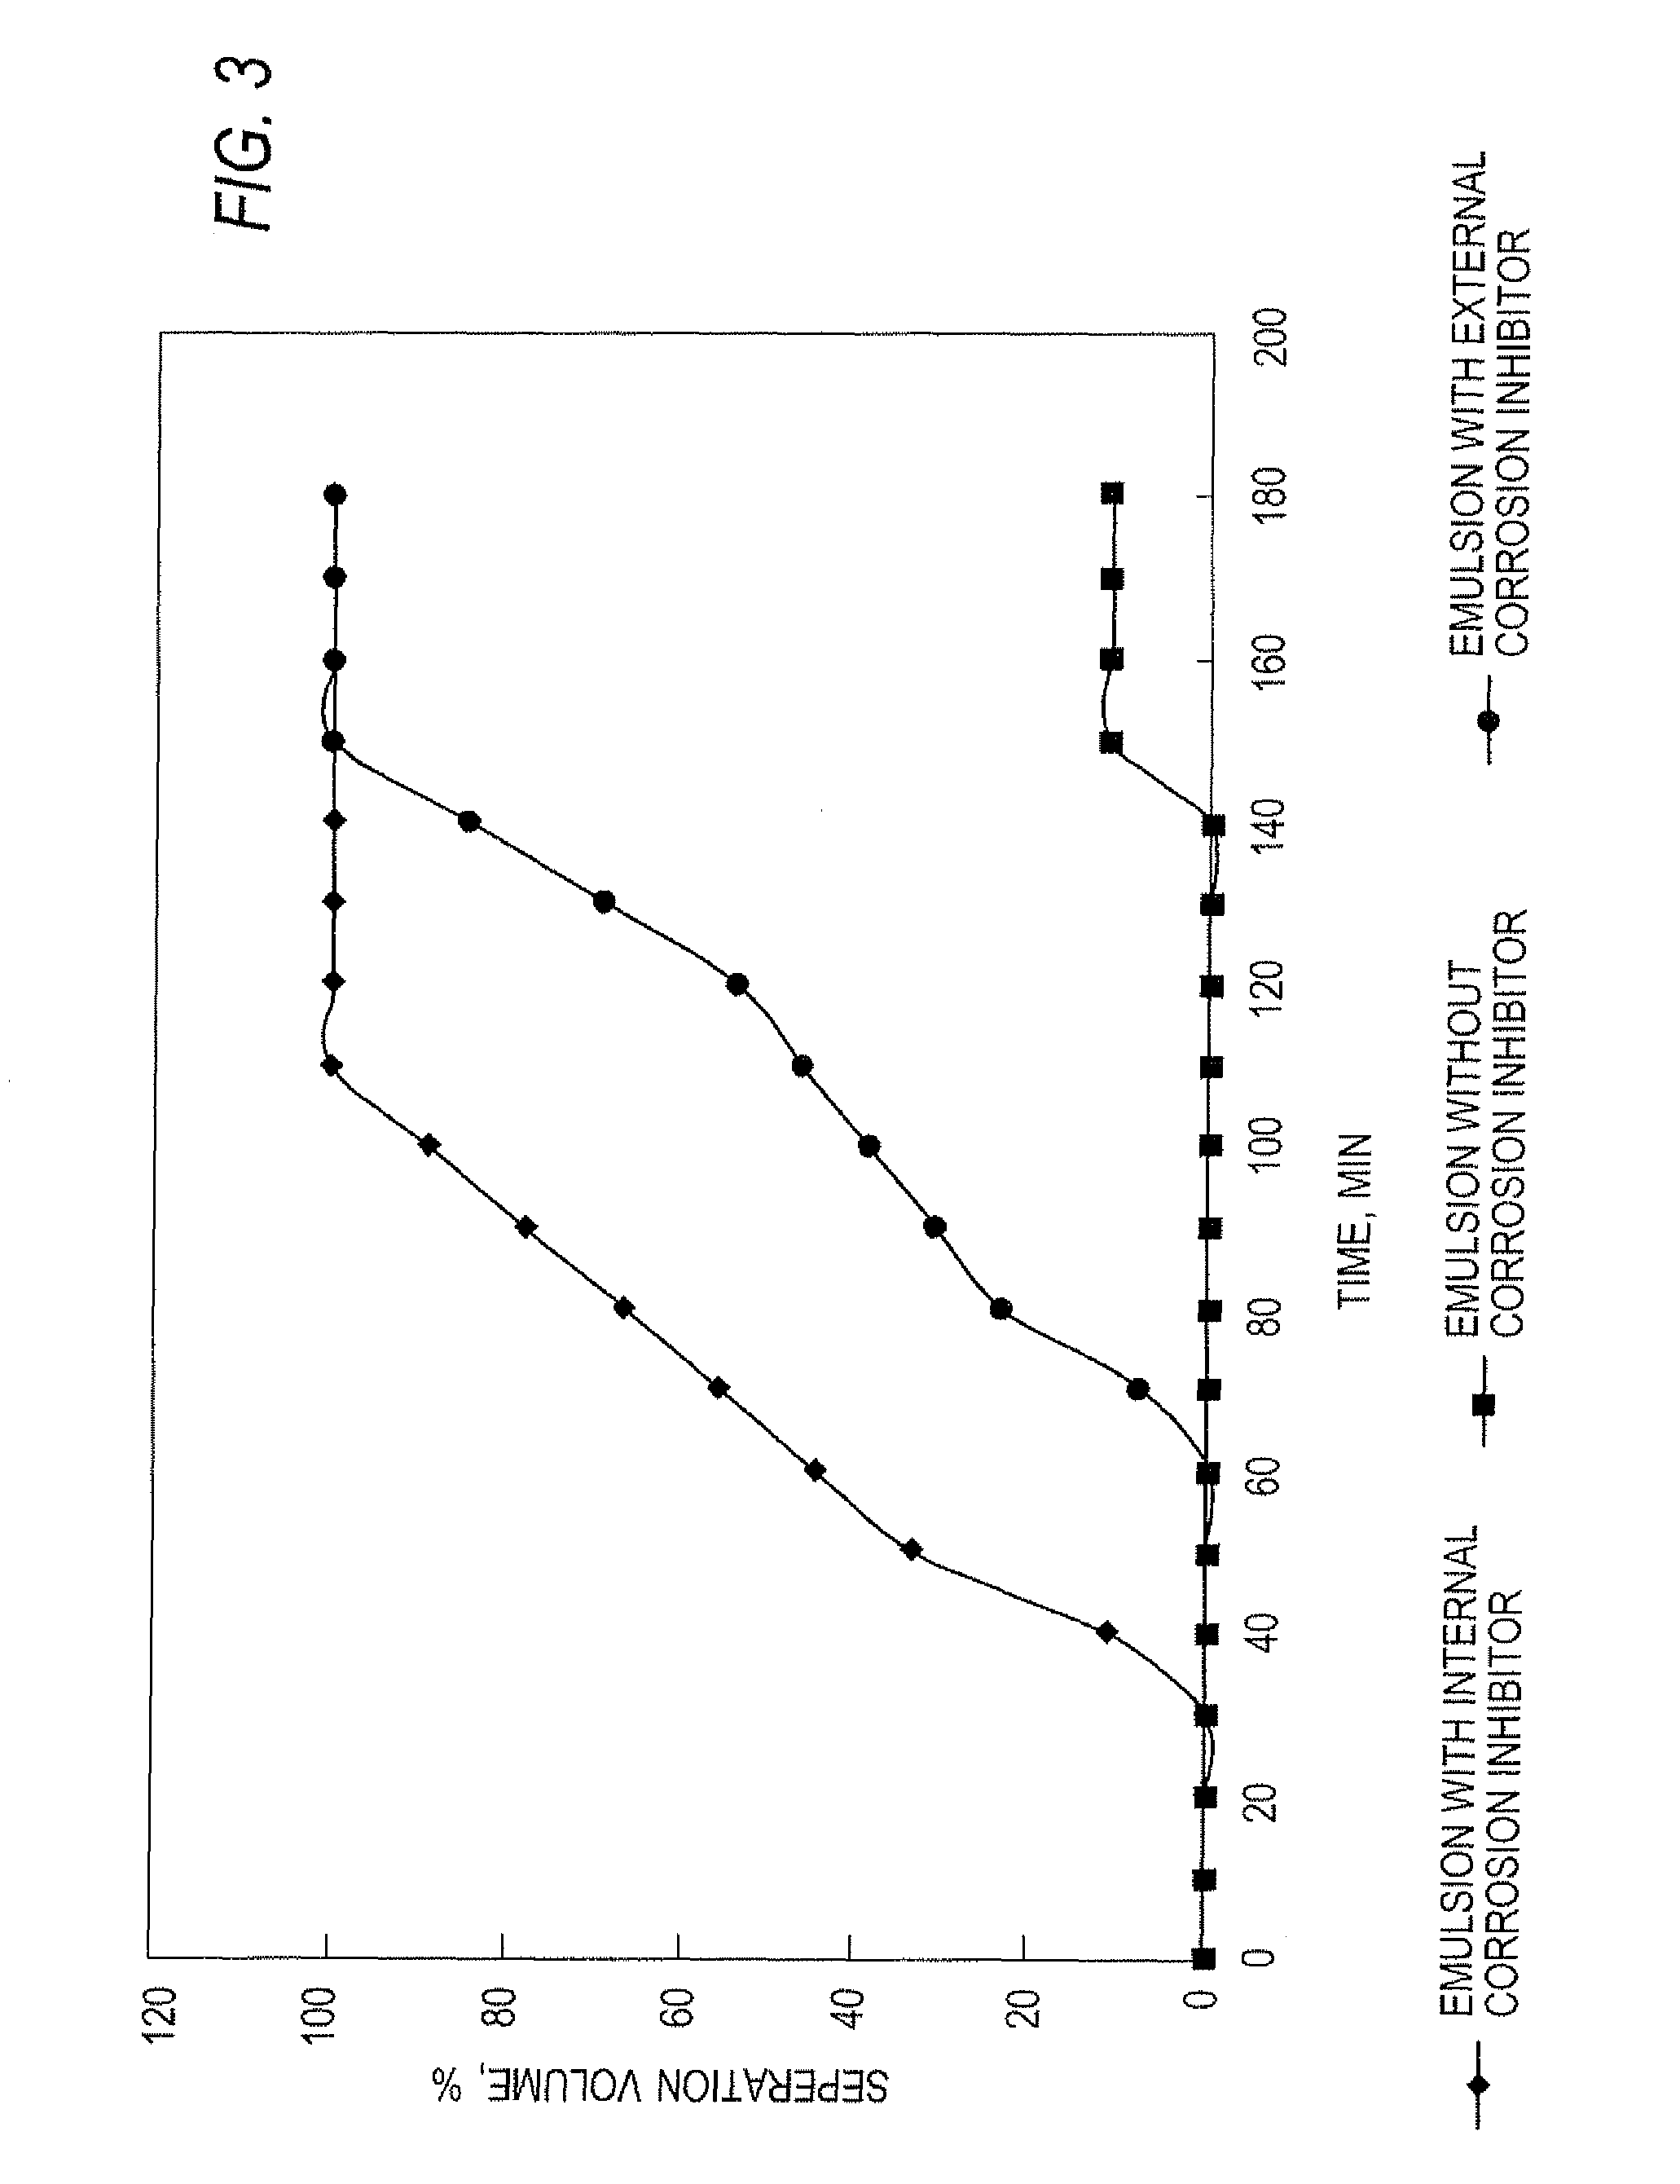 Method of mixing a corrosion inhibitor in an acid-in-oil emulsion